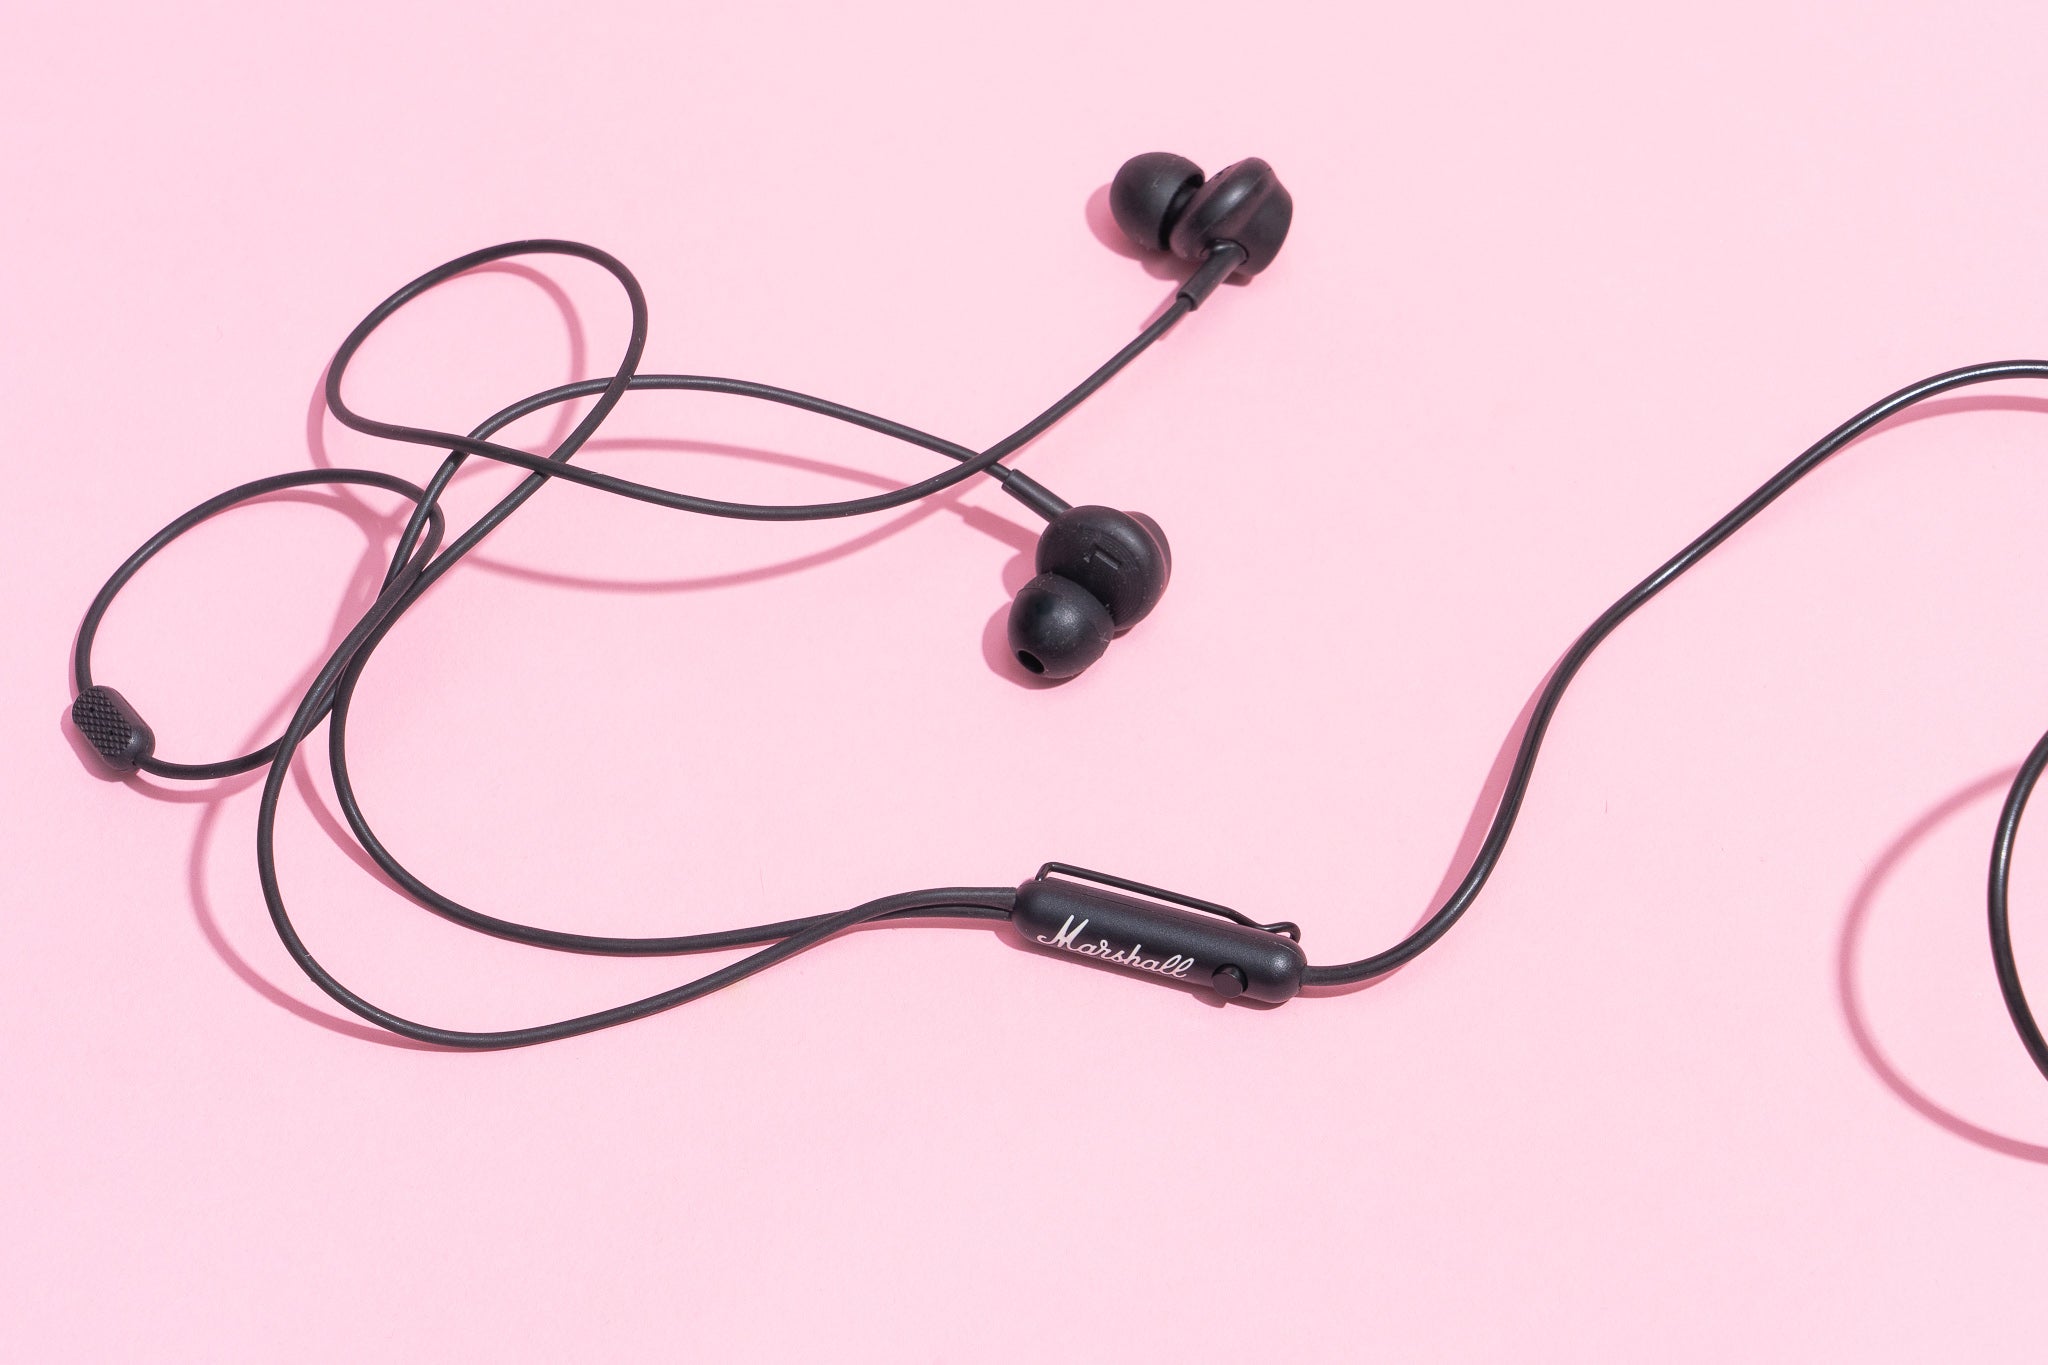 Wired Earphones: The Timeless Choice for Premium Sound Quality